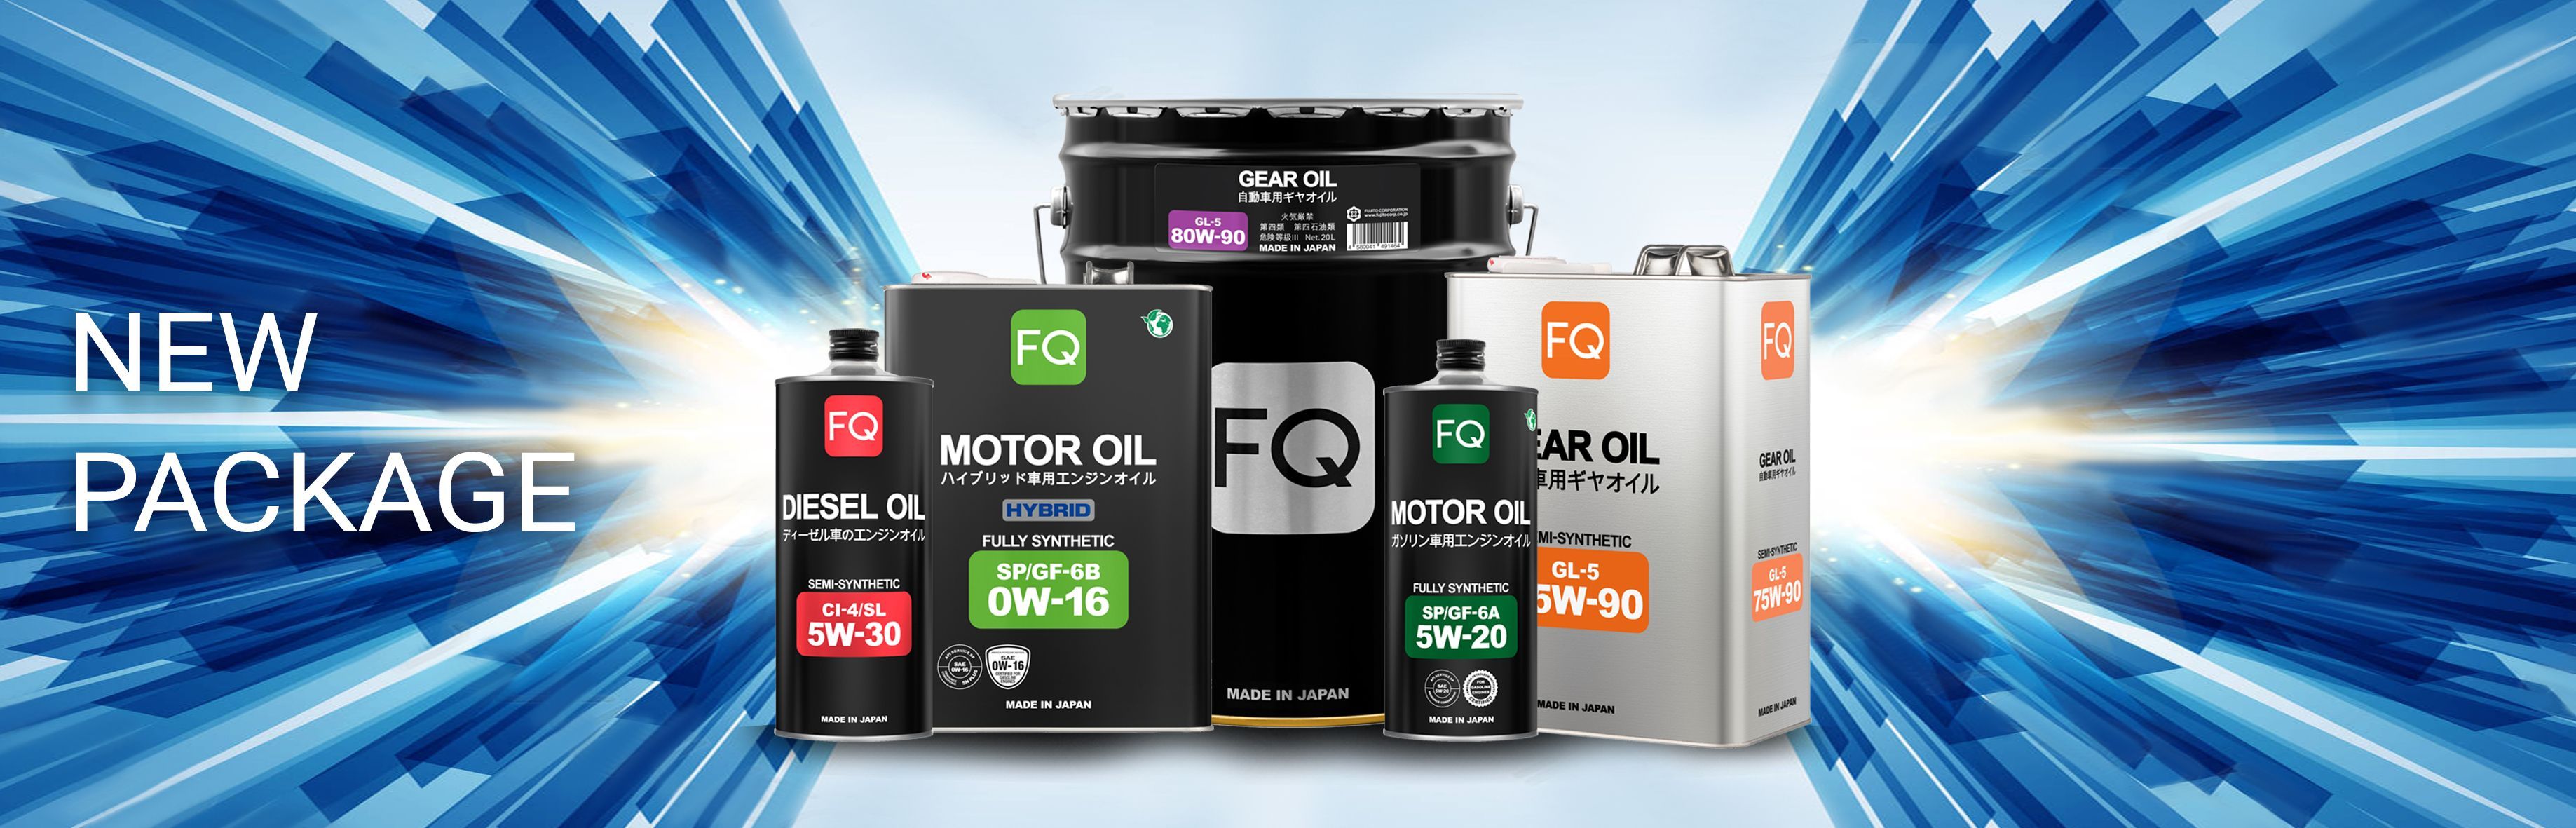 FQ engine and transmission oil in new packaging